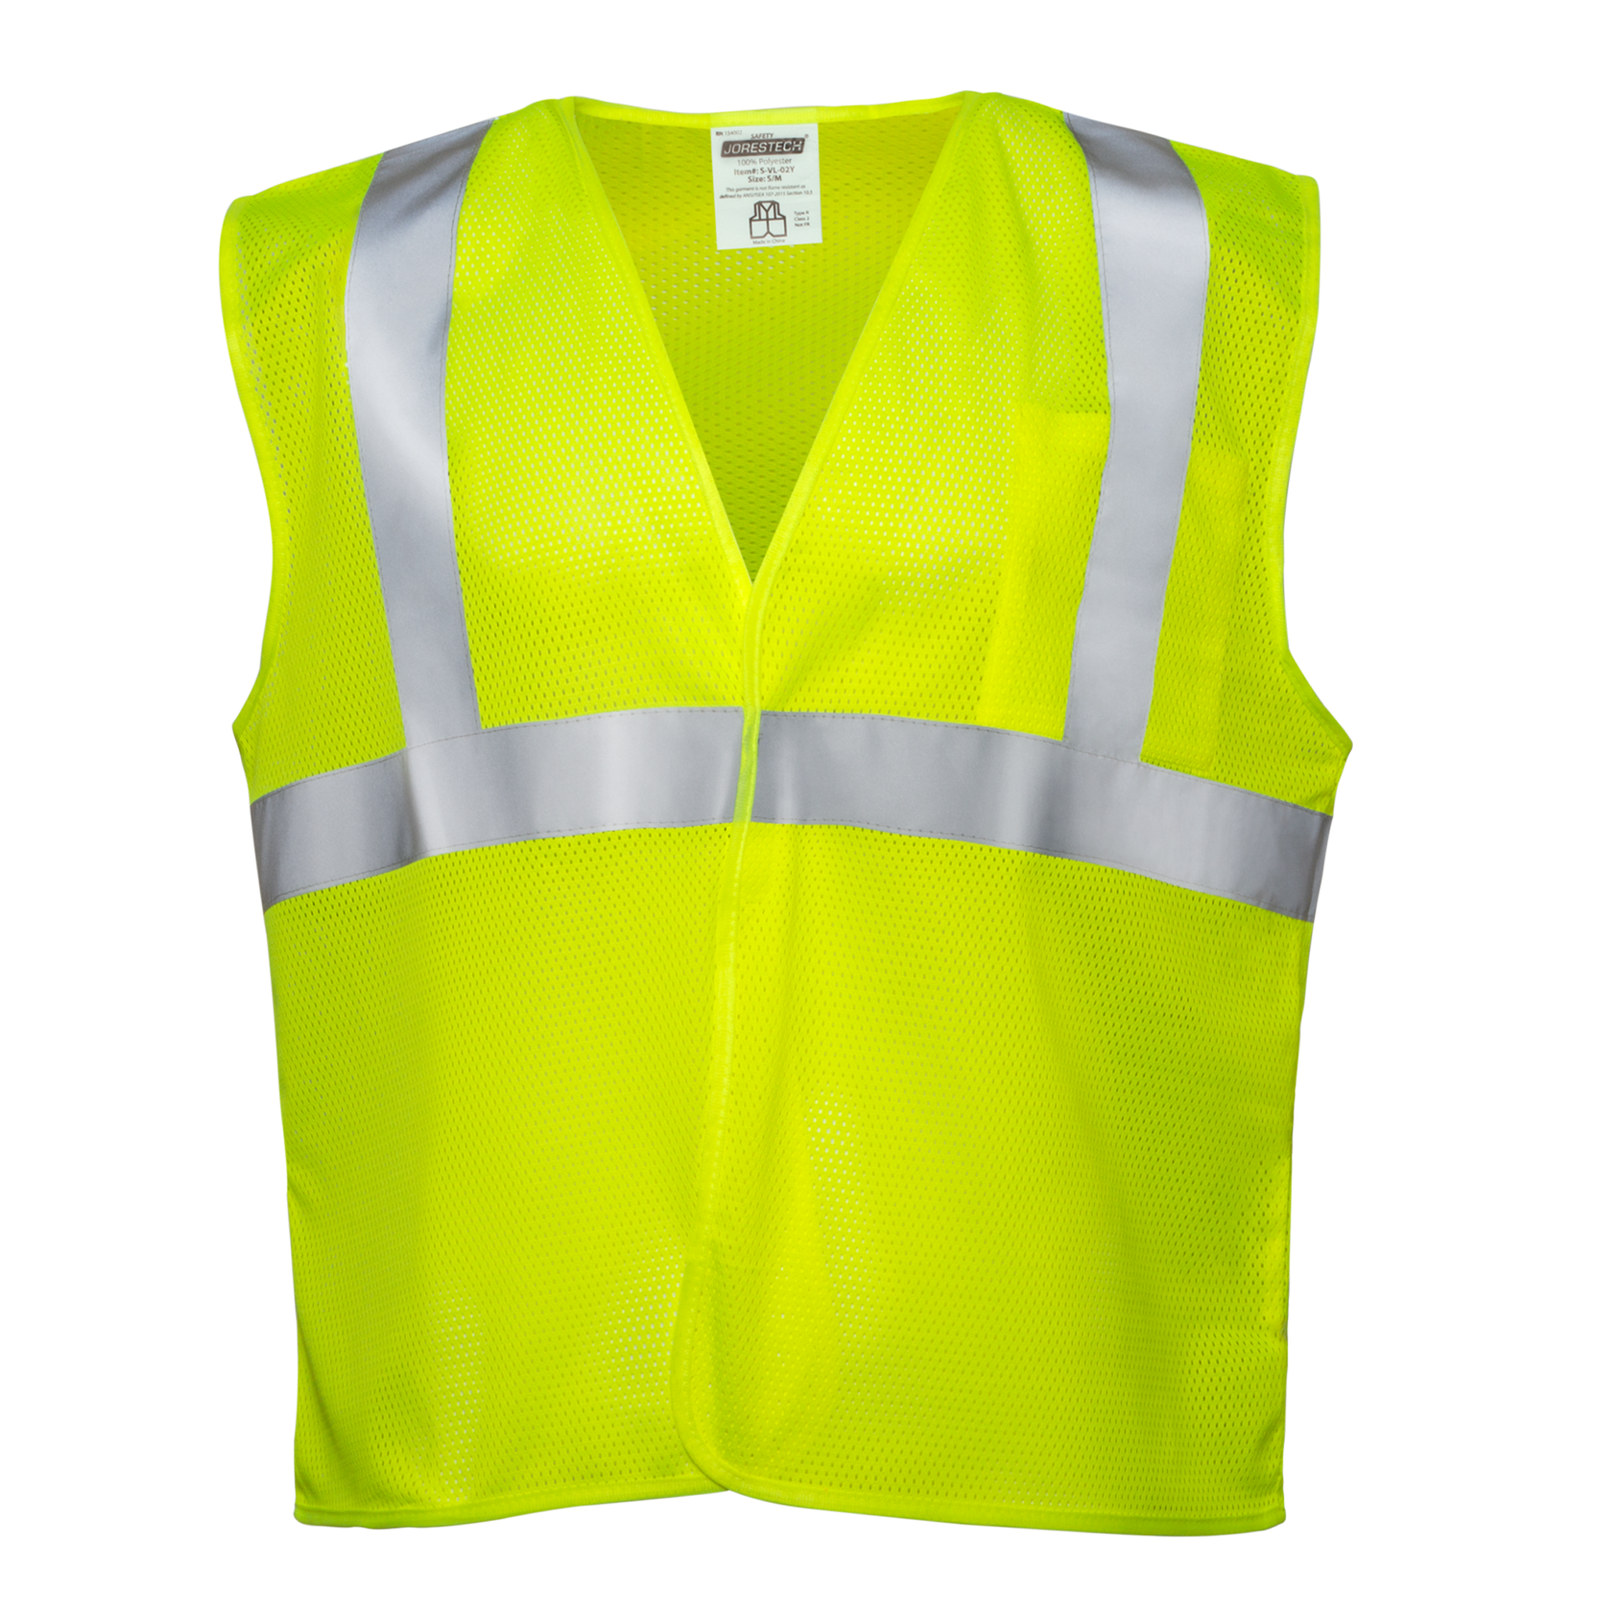 ANSI compliant Lime/Yellow hi visibility safety vest with 2 inches reflective strip